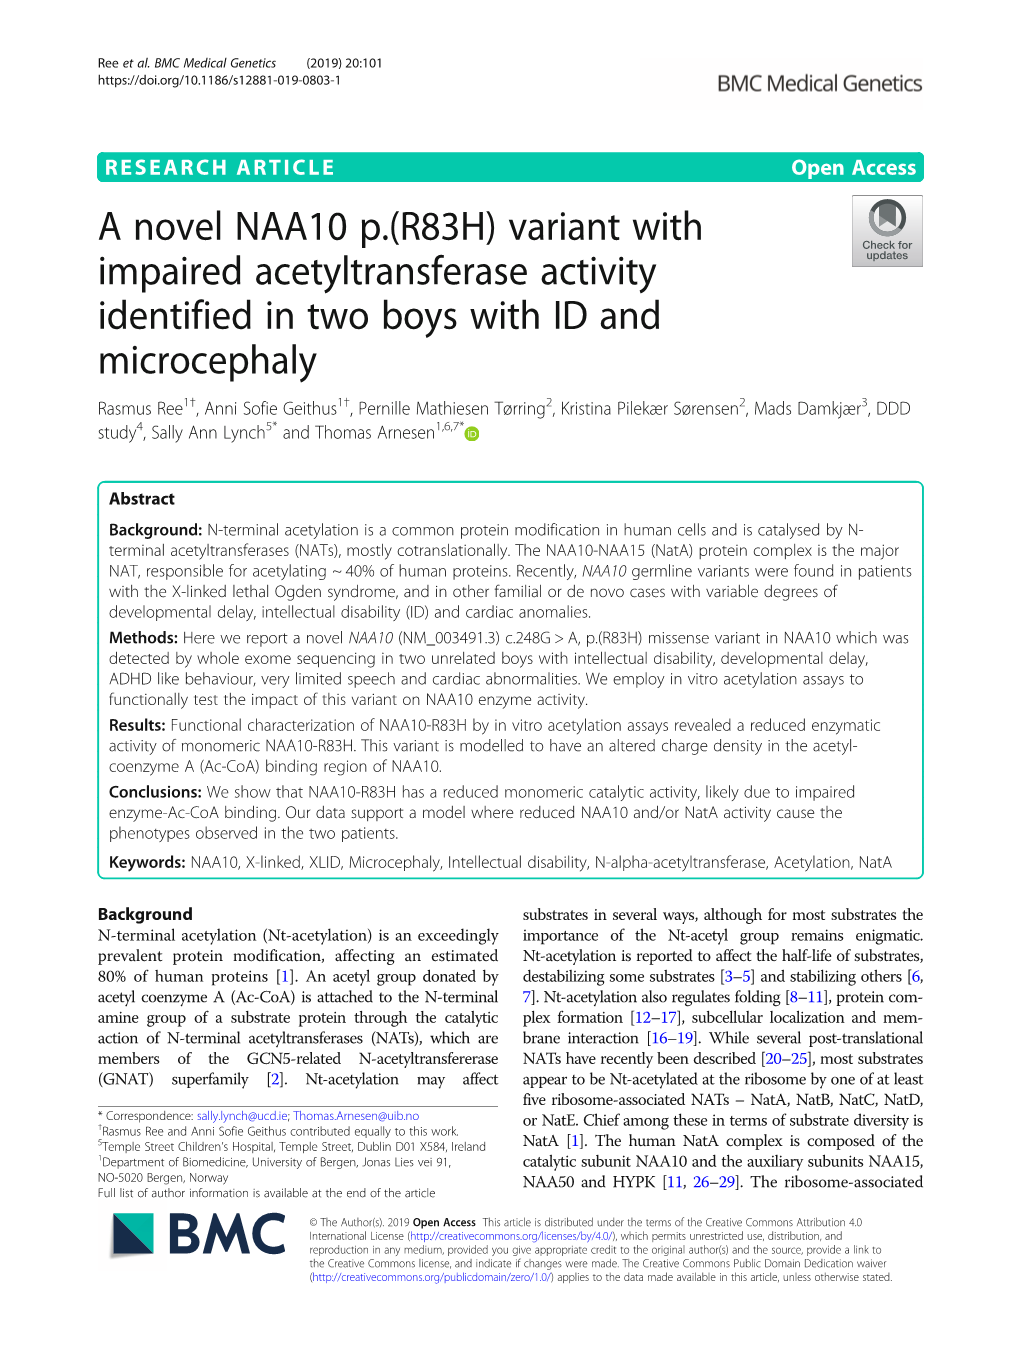 A Novel NAA10 P.(R83H) Variant with Impaired Acetyltransferase Activity